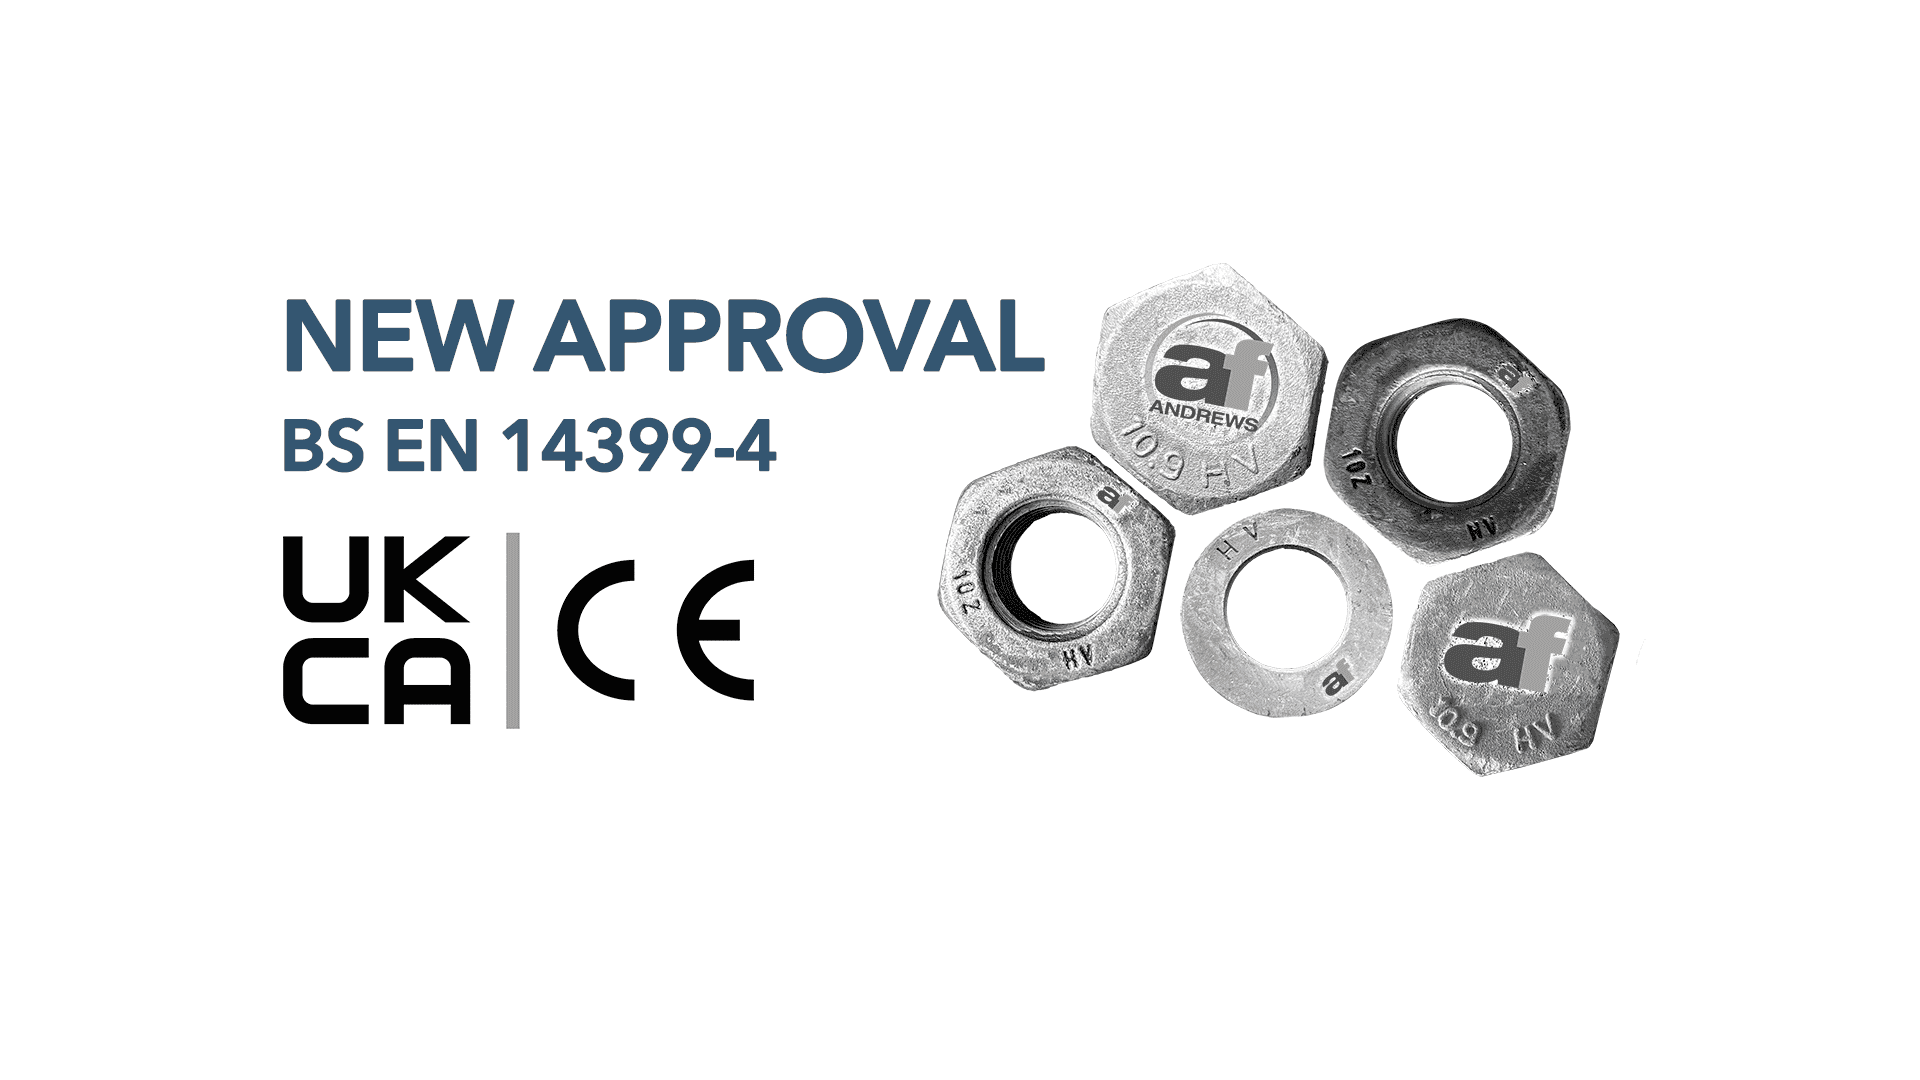 UKCA & CE Certificates and New Approval for EN 14399-4 (System HV)